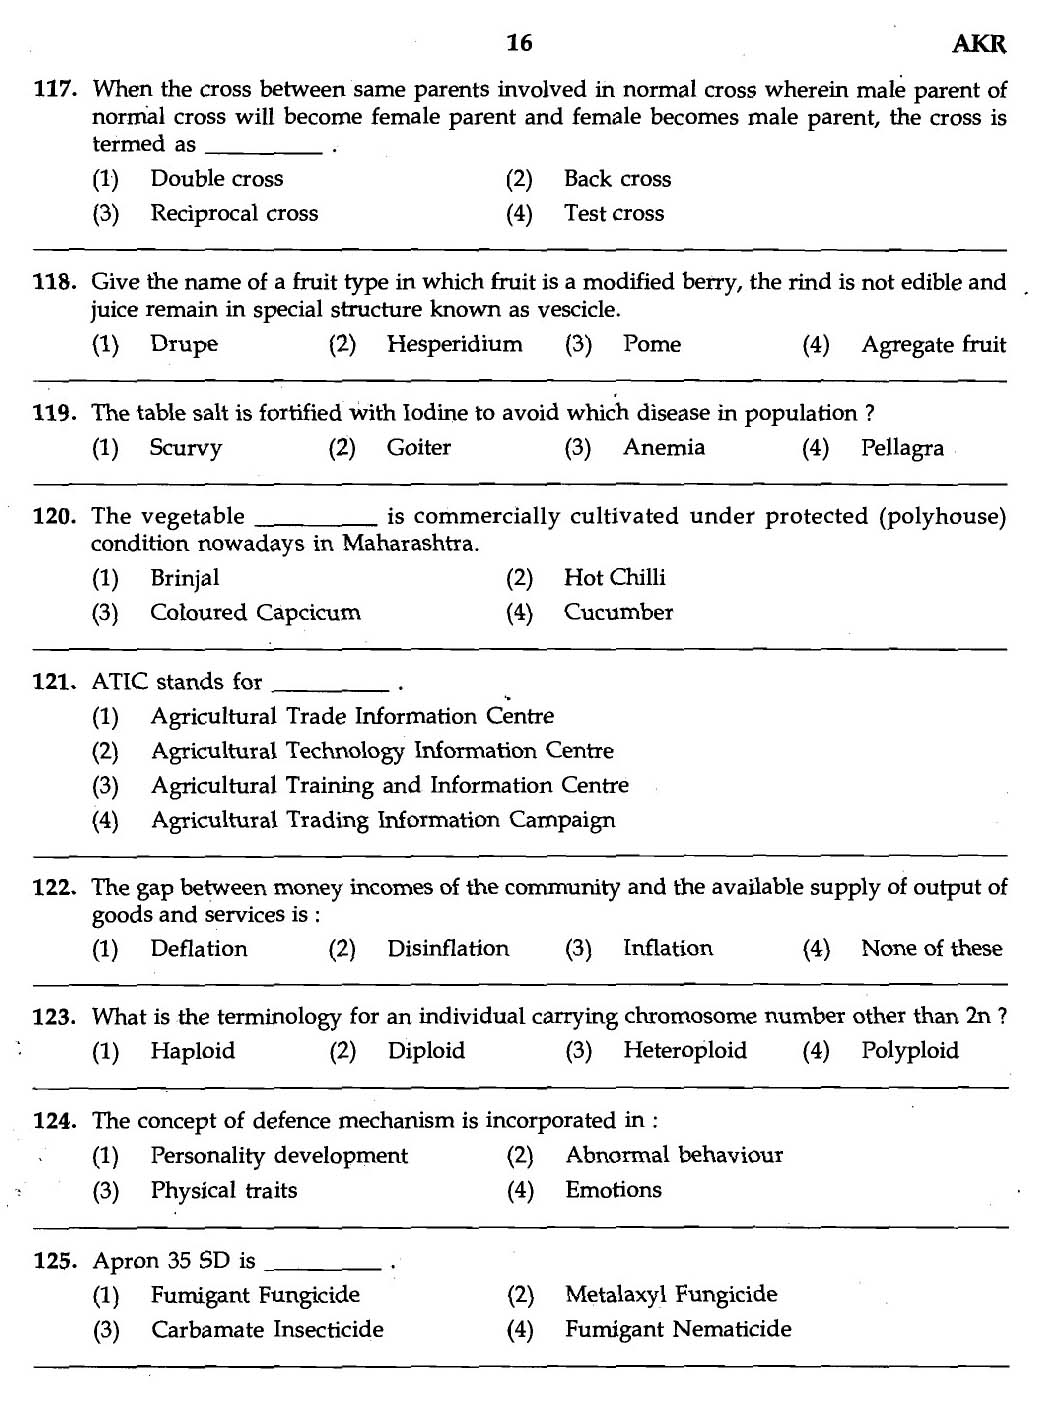 MPSC Agricultural Services Exam 2007 Question Paper Agriculture 14